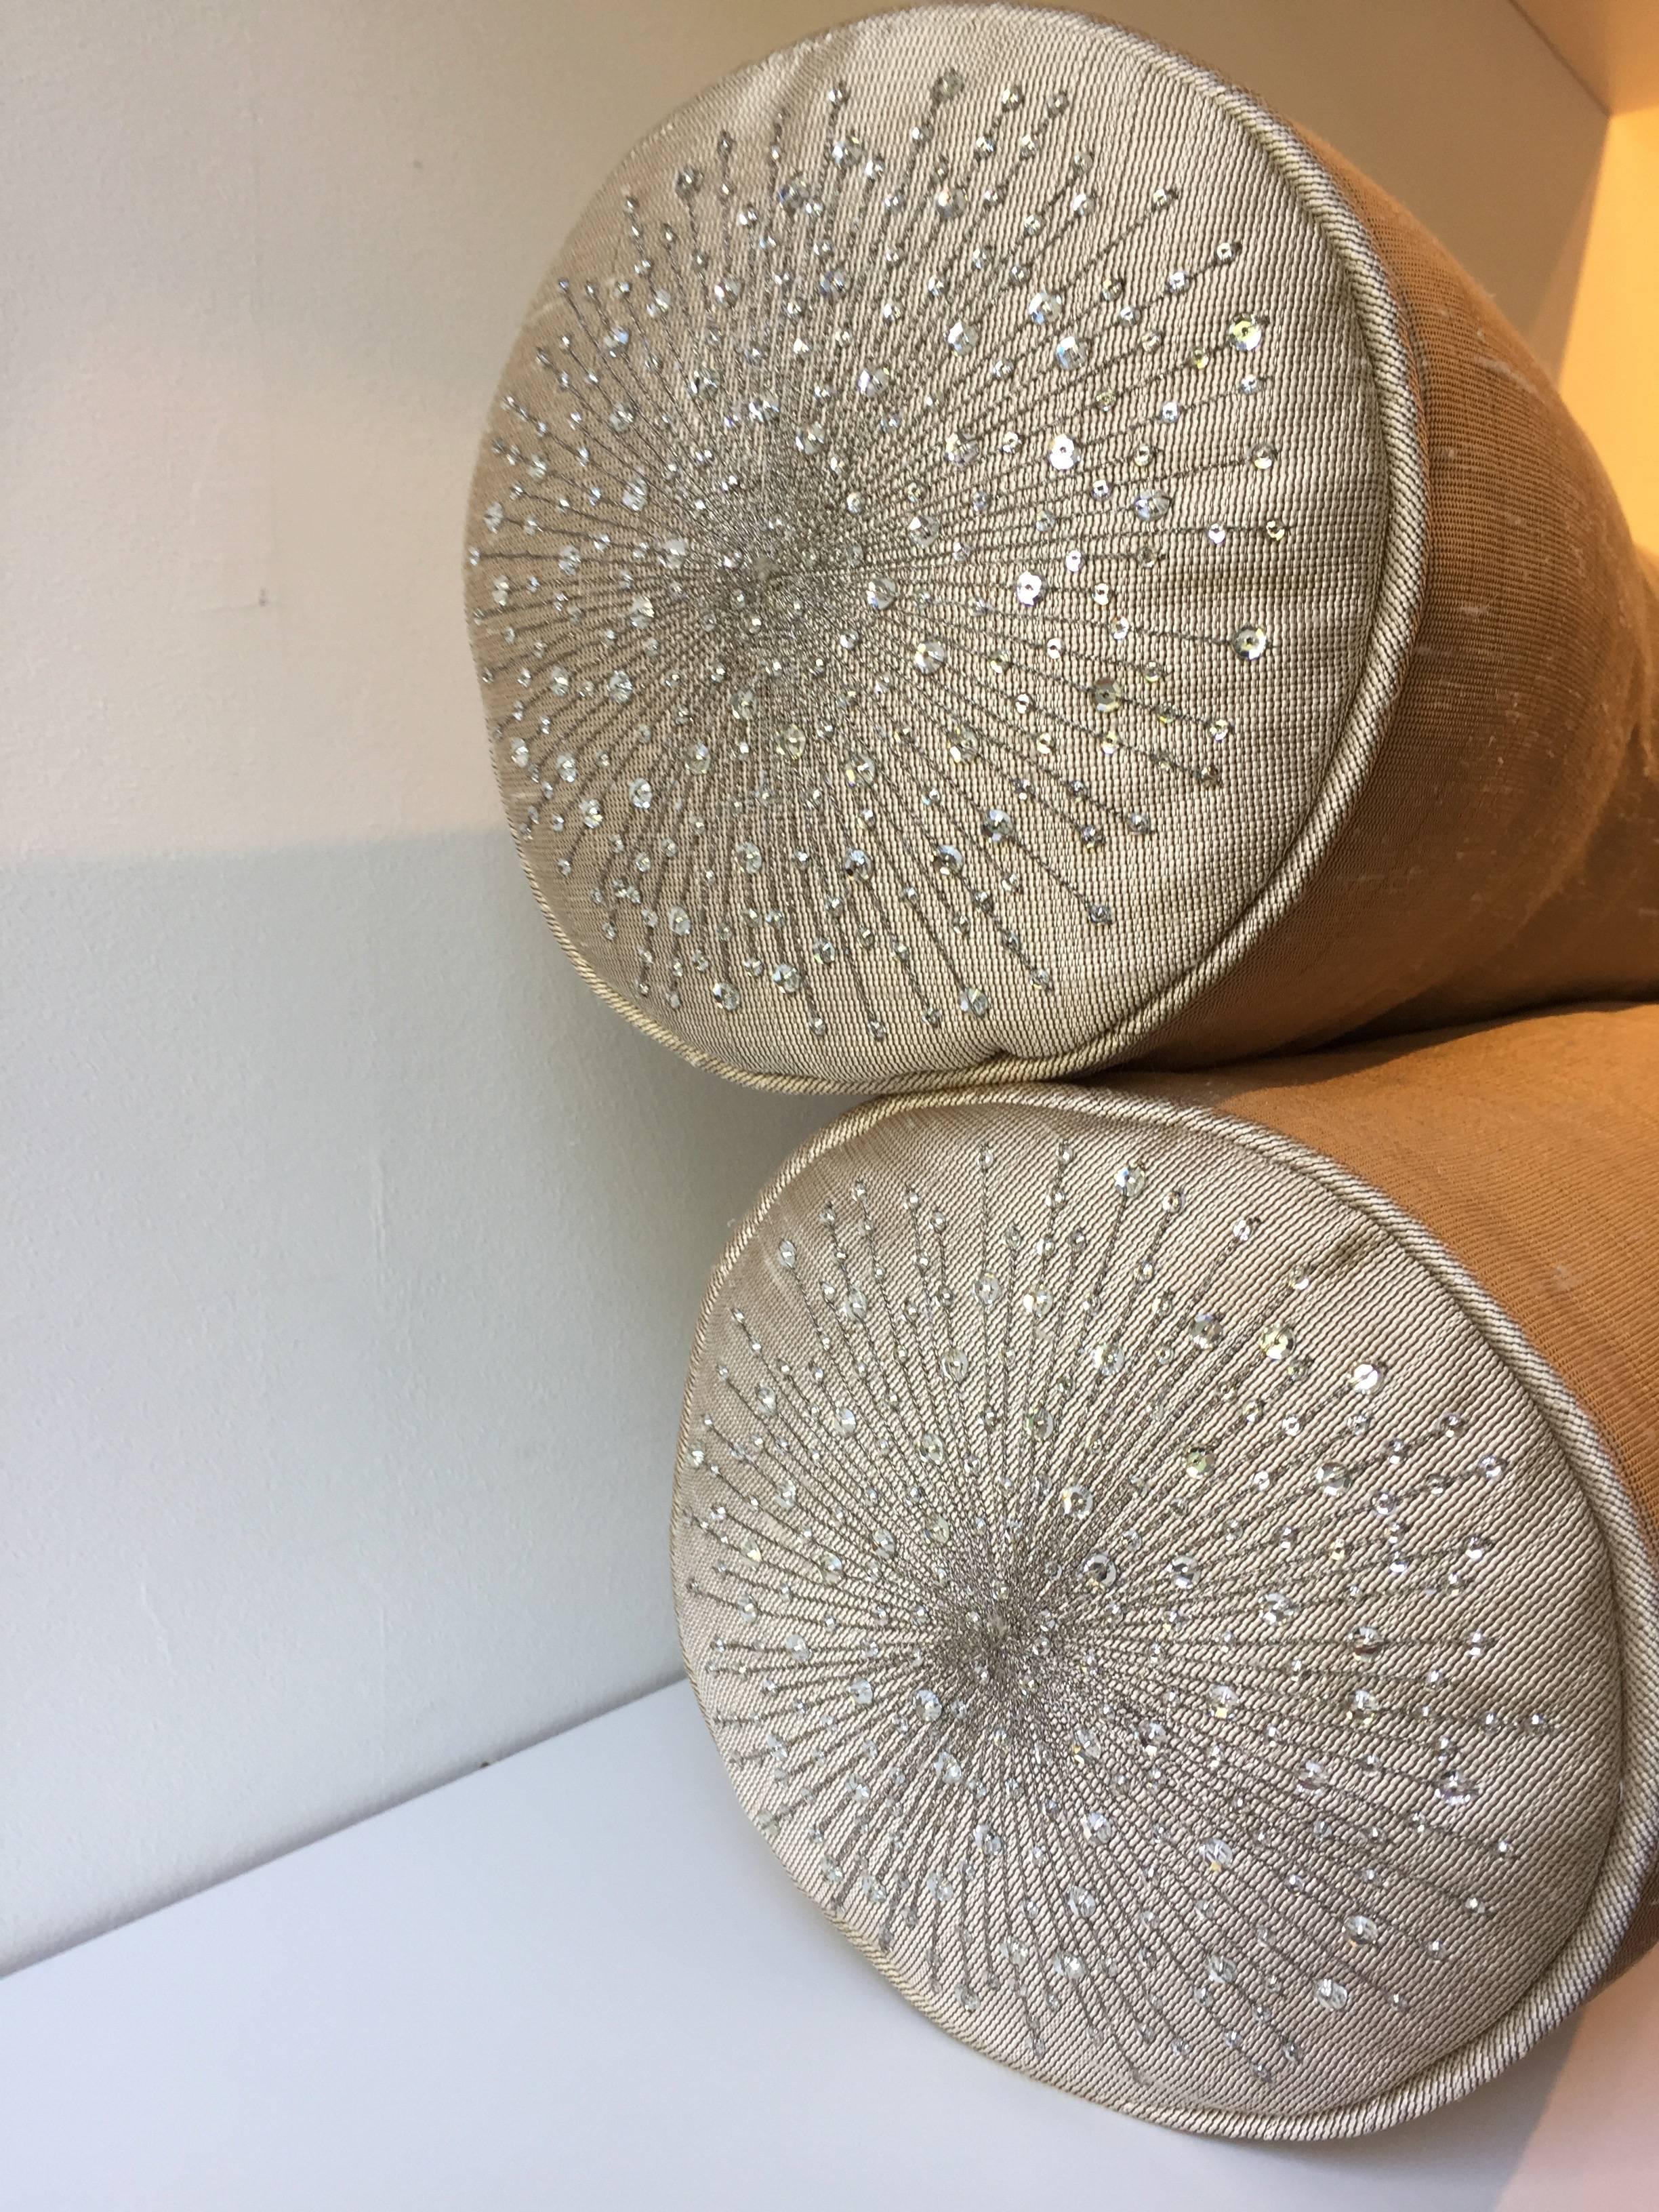 One pair of bolster cushions, each bolster has two no hand embroidered side pads with silver thread and Swarovski crystals color crystal, self piped, handwoven silk Bruno triplet color bamboo, size 19cm diameter x 60cm length, bolster covers with